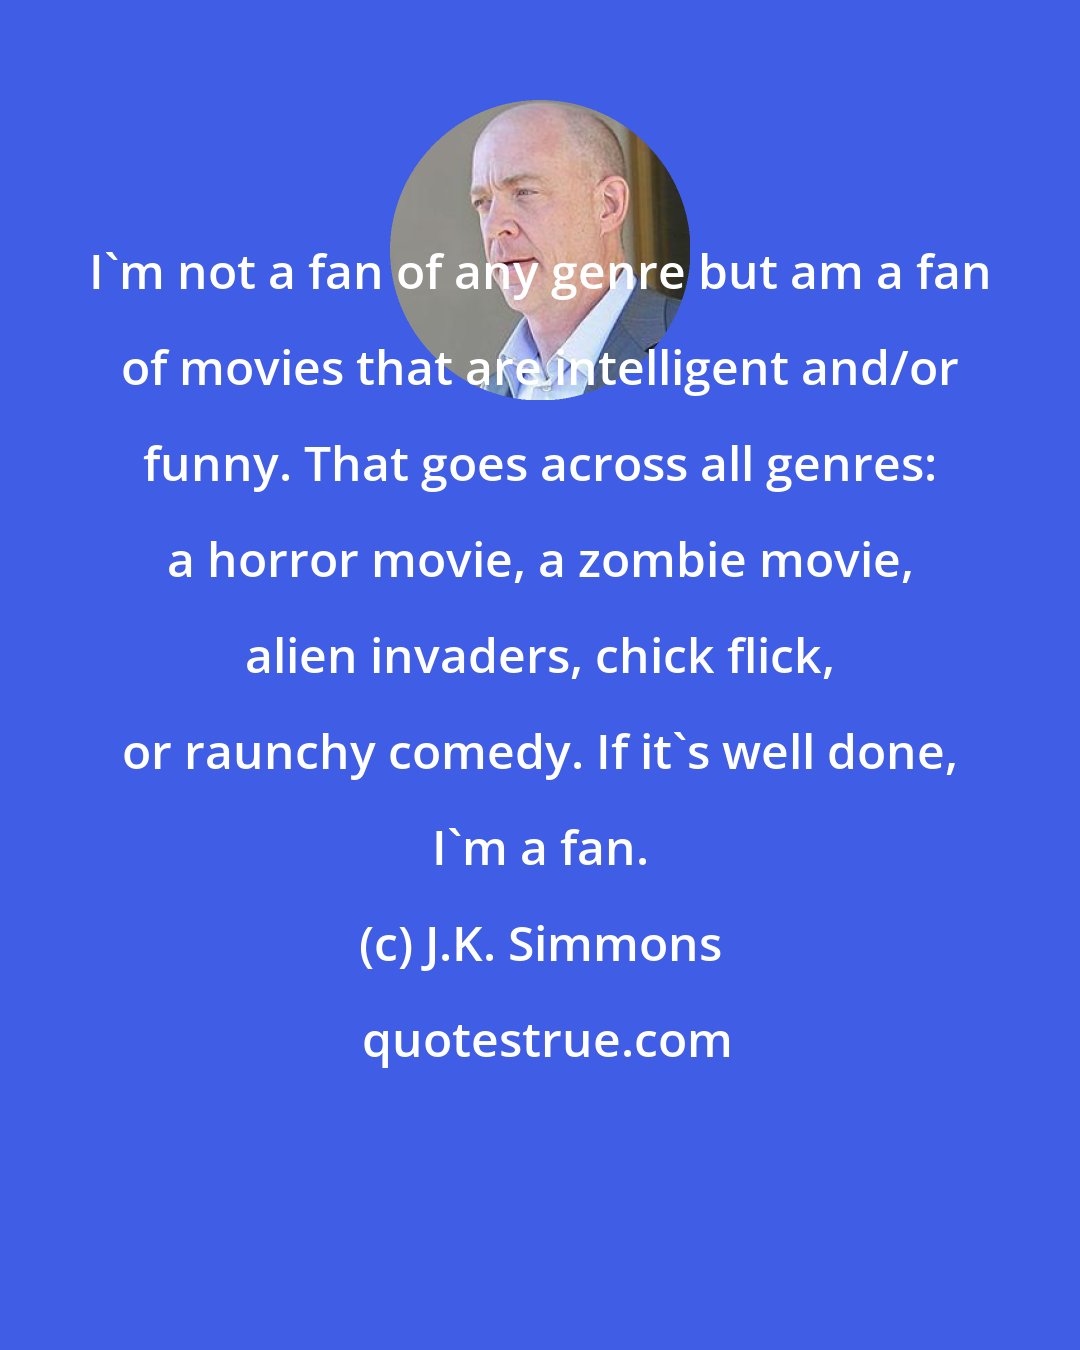 J.K. Simmons: I'm not a fan of any genre but am a fan of movies that are intelligent and/or funny. That goes across all genres: a horror movie, a zombie movie, alien invaders, chick flick, or raunchy comedy. If it's well done, I'm a fan.